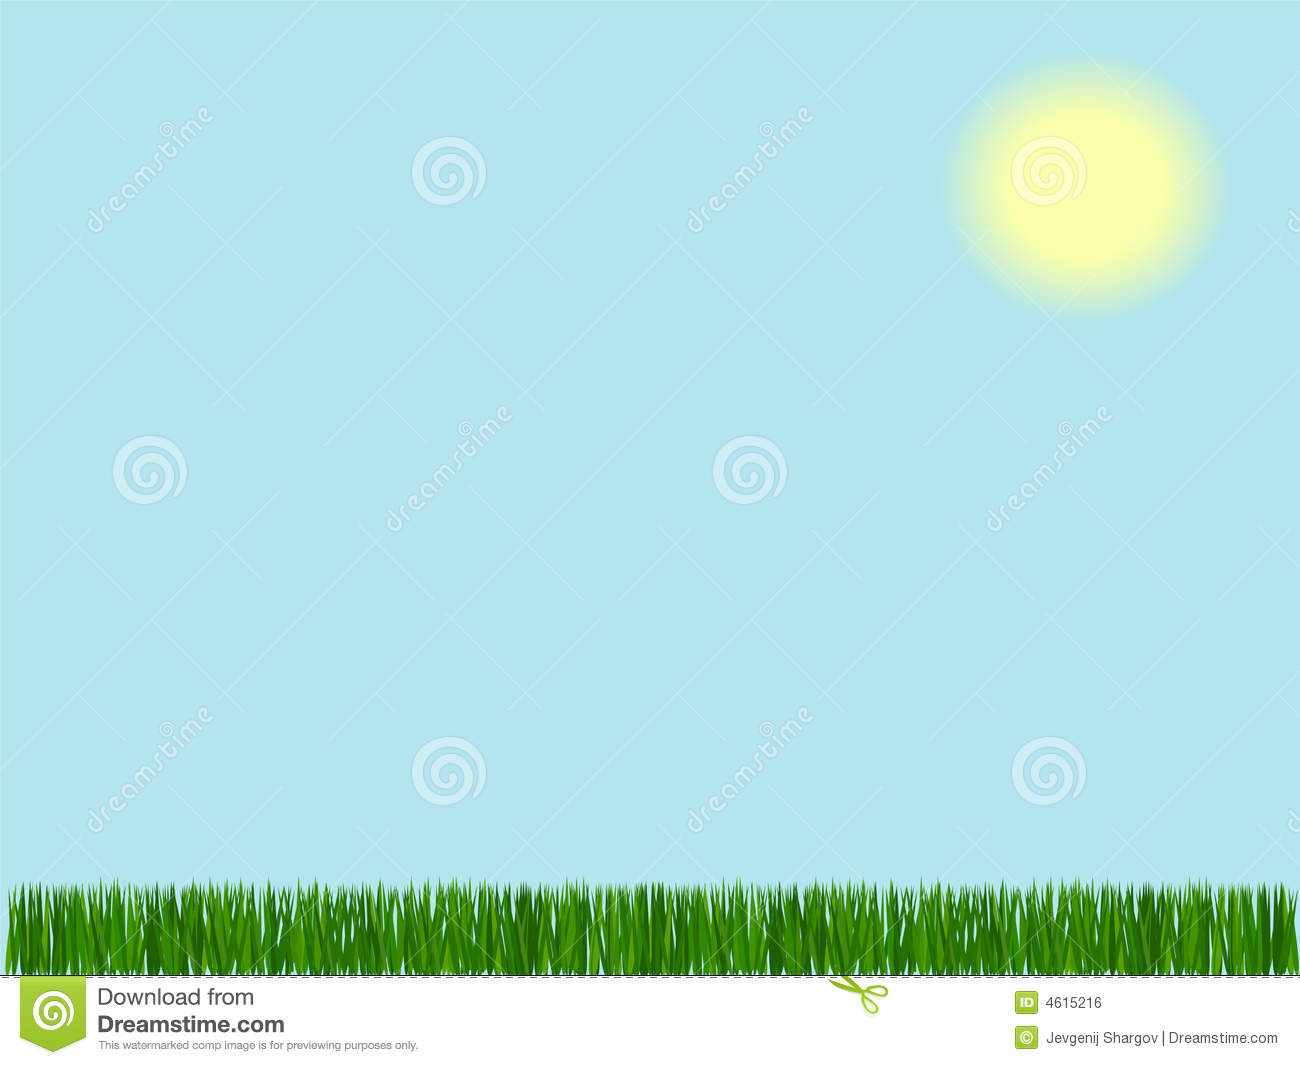 Grass On Sky Background Royalty Free Stock Image   Image  4615216